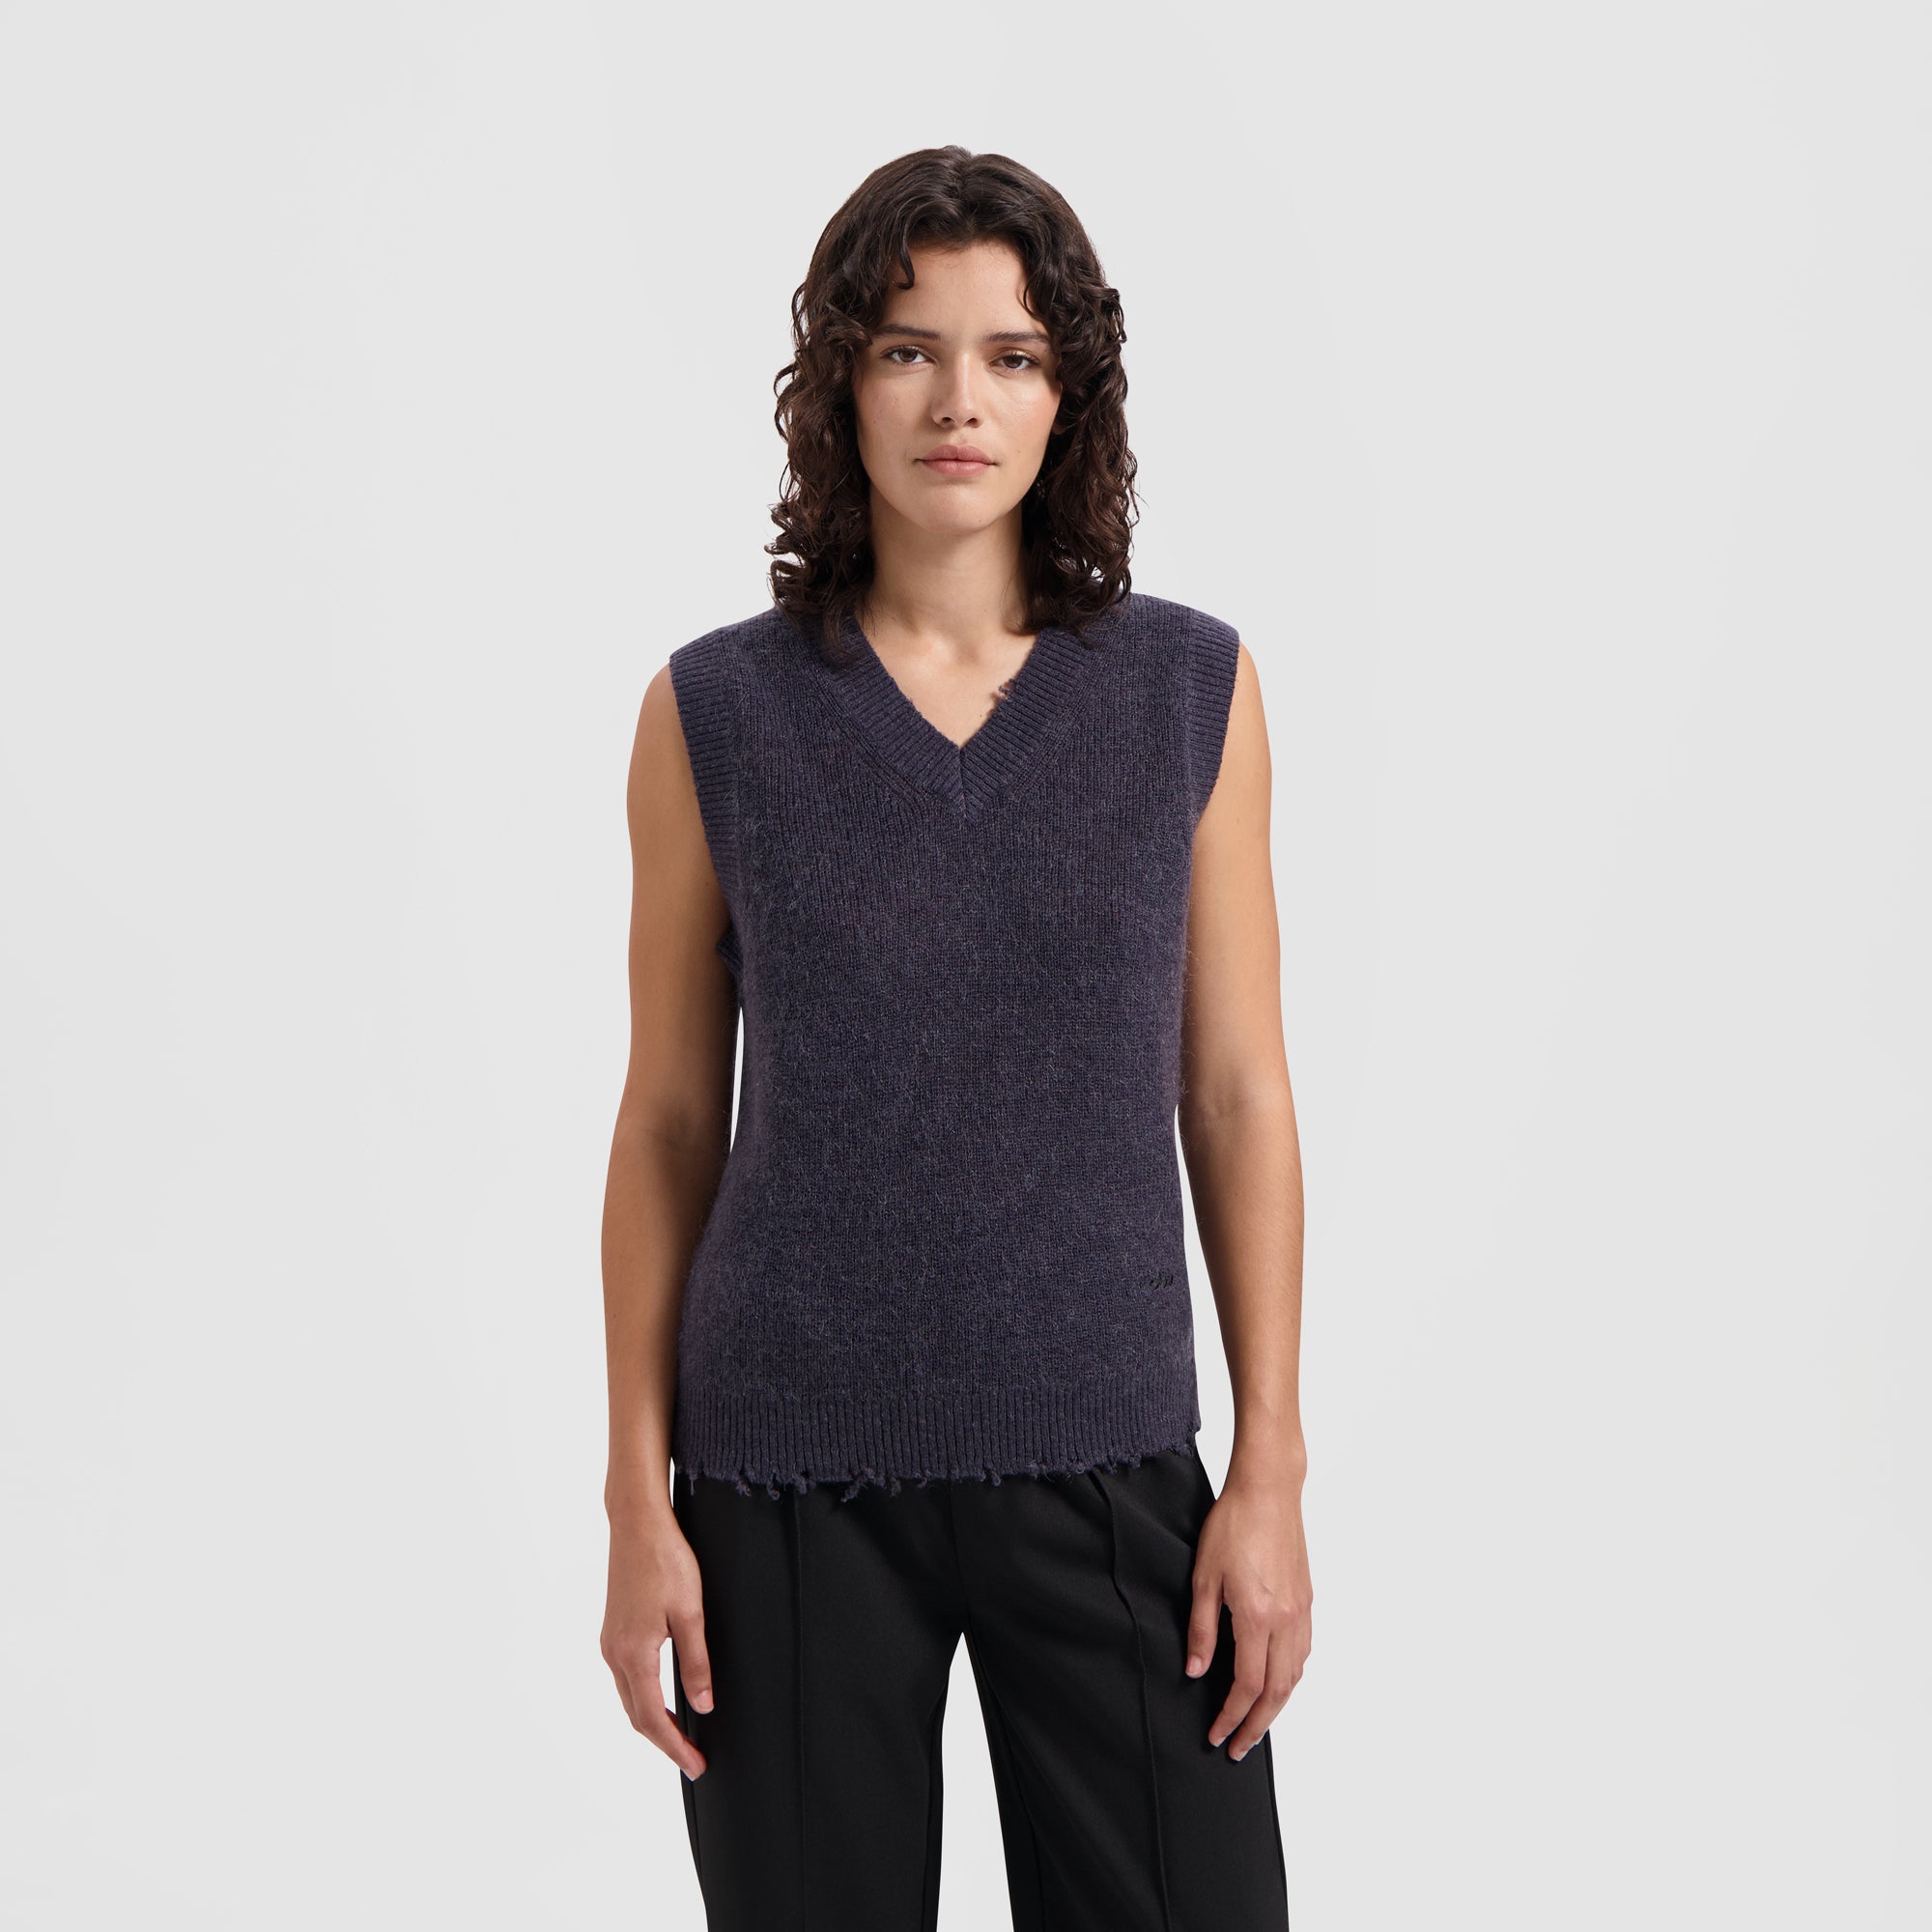 WMN Mohair Knitted Vest - Grey